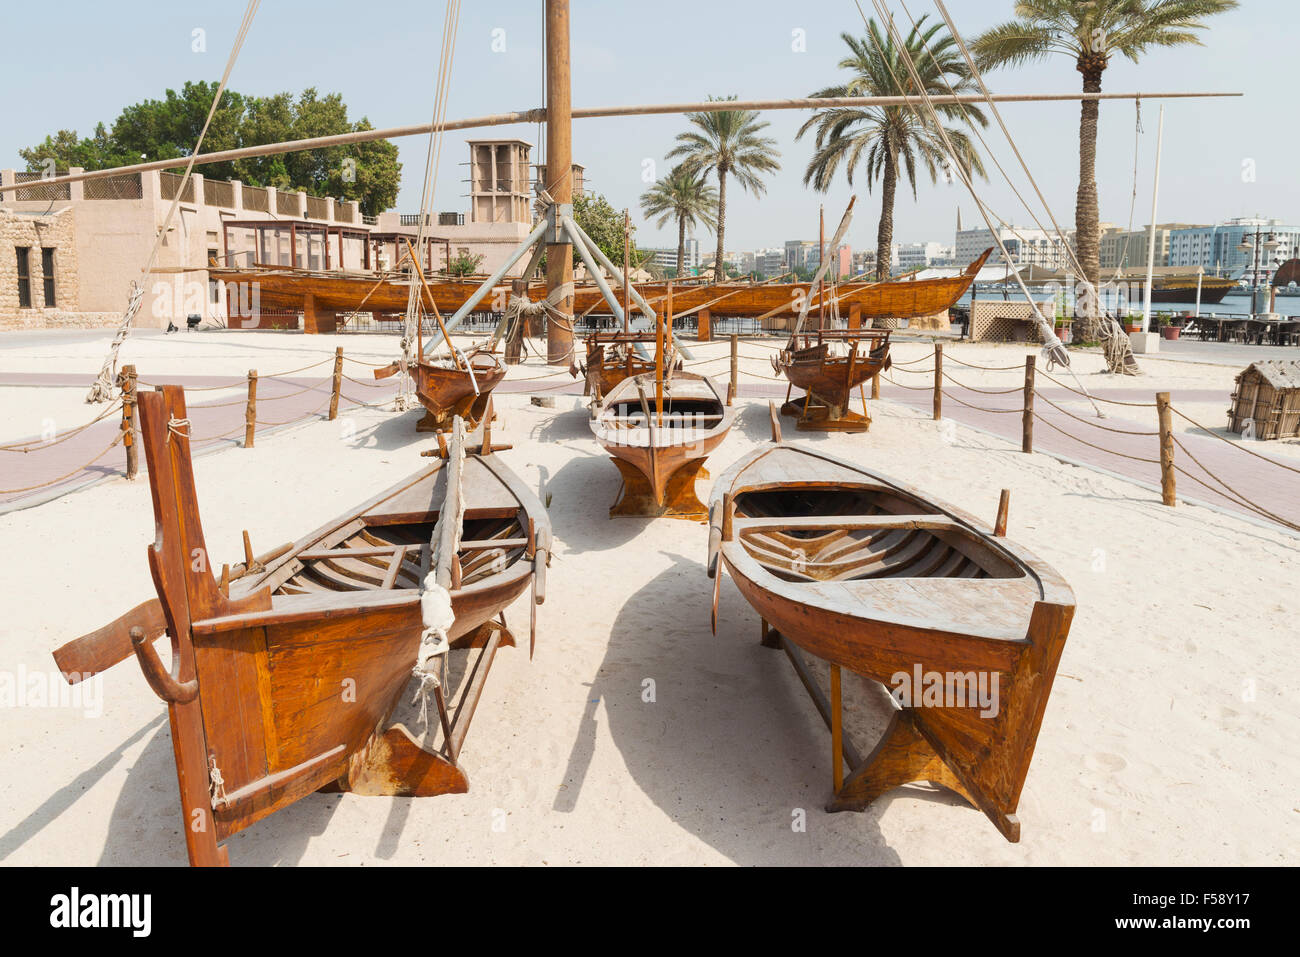 Traditional wooden boats on display at the Diving Village outdoor Museum in the  Heritage area at Al Shindagha in Dubai United A Stock Photo